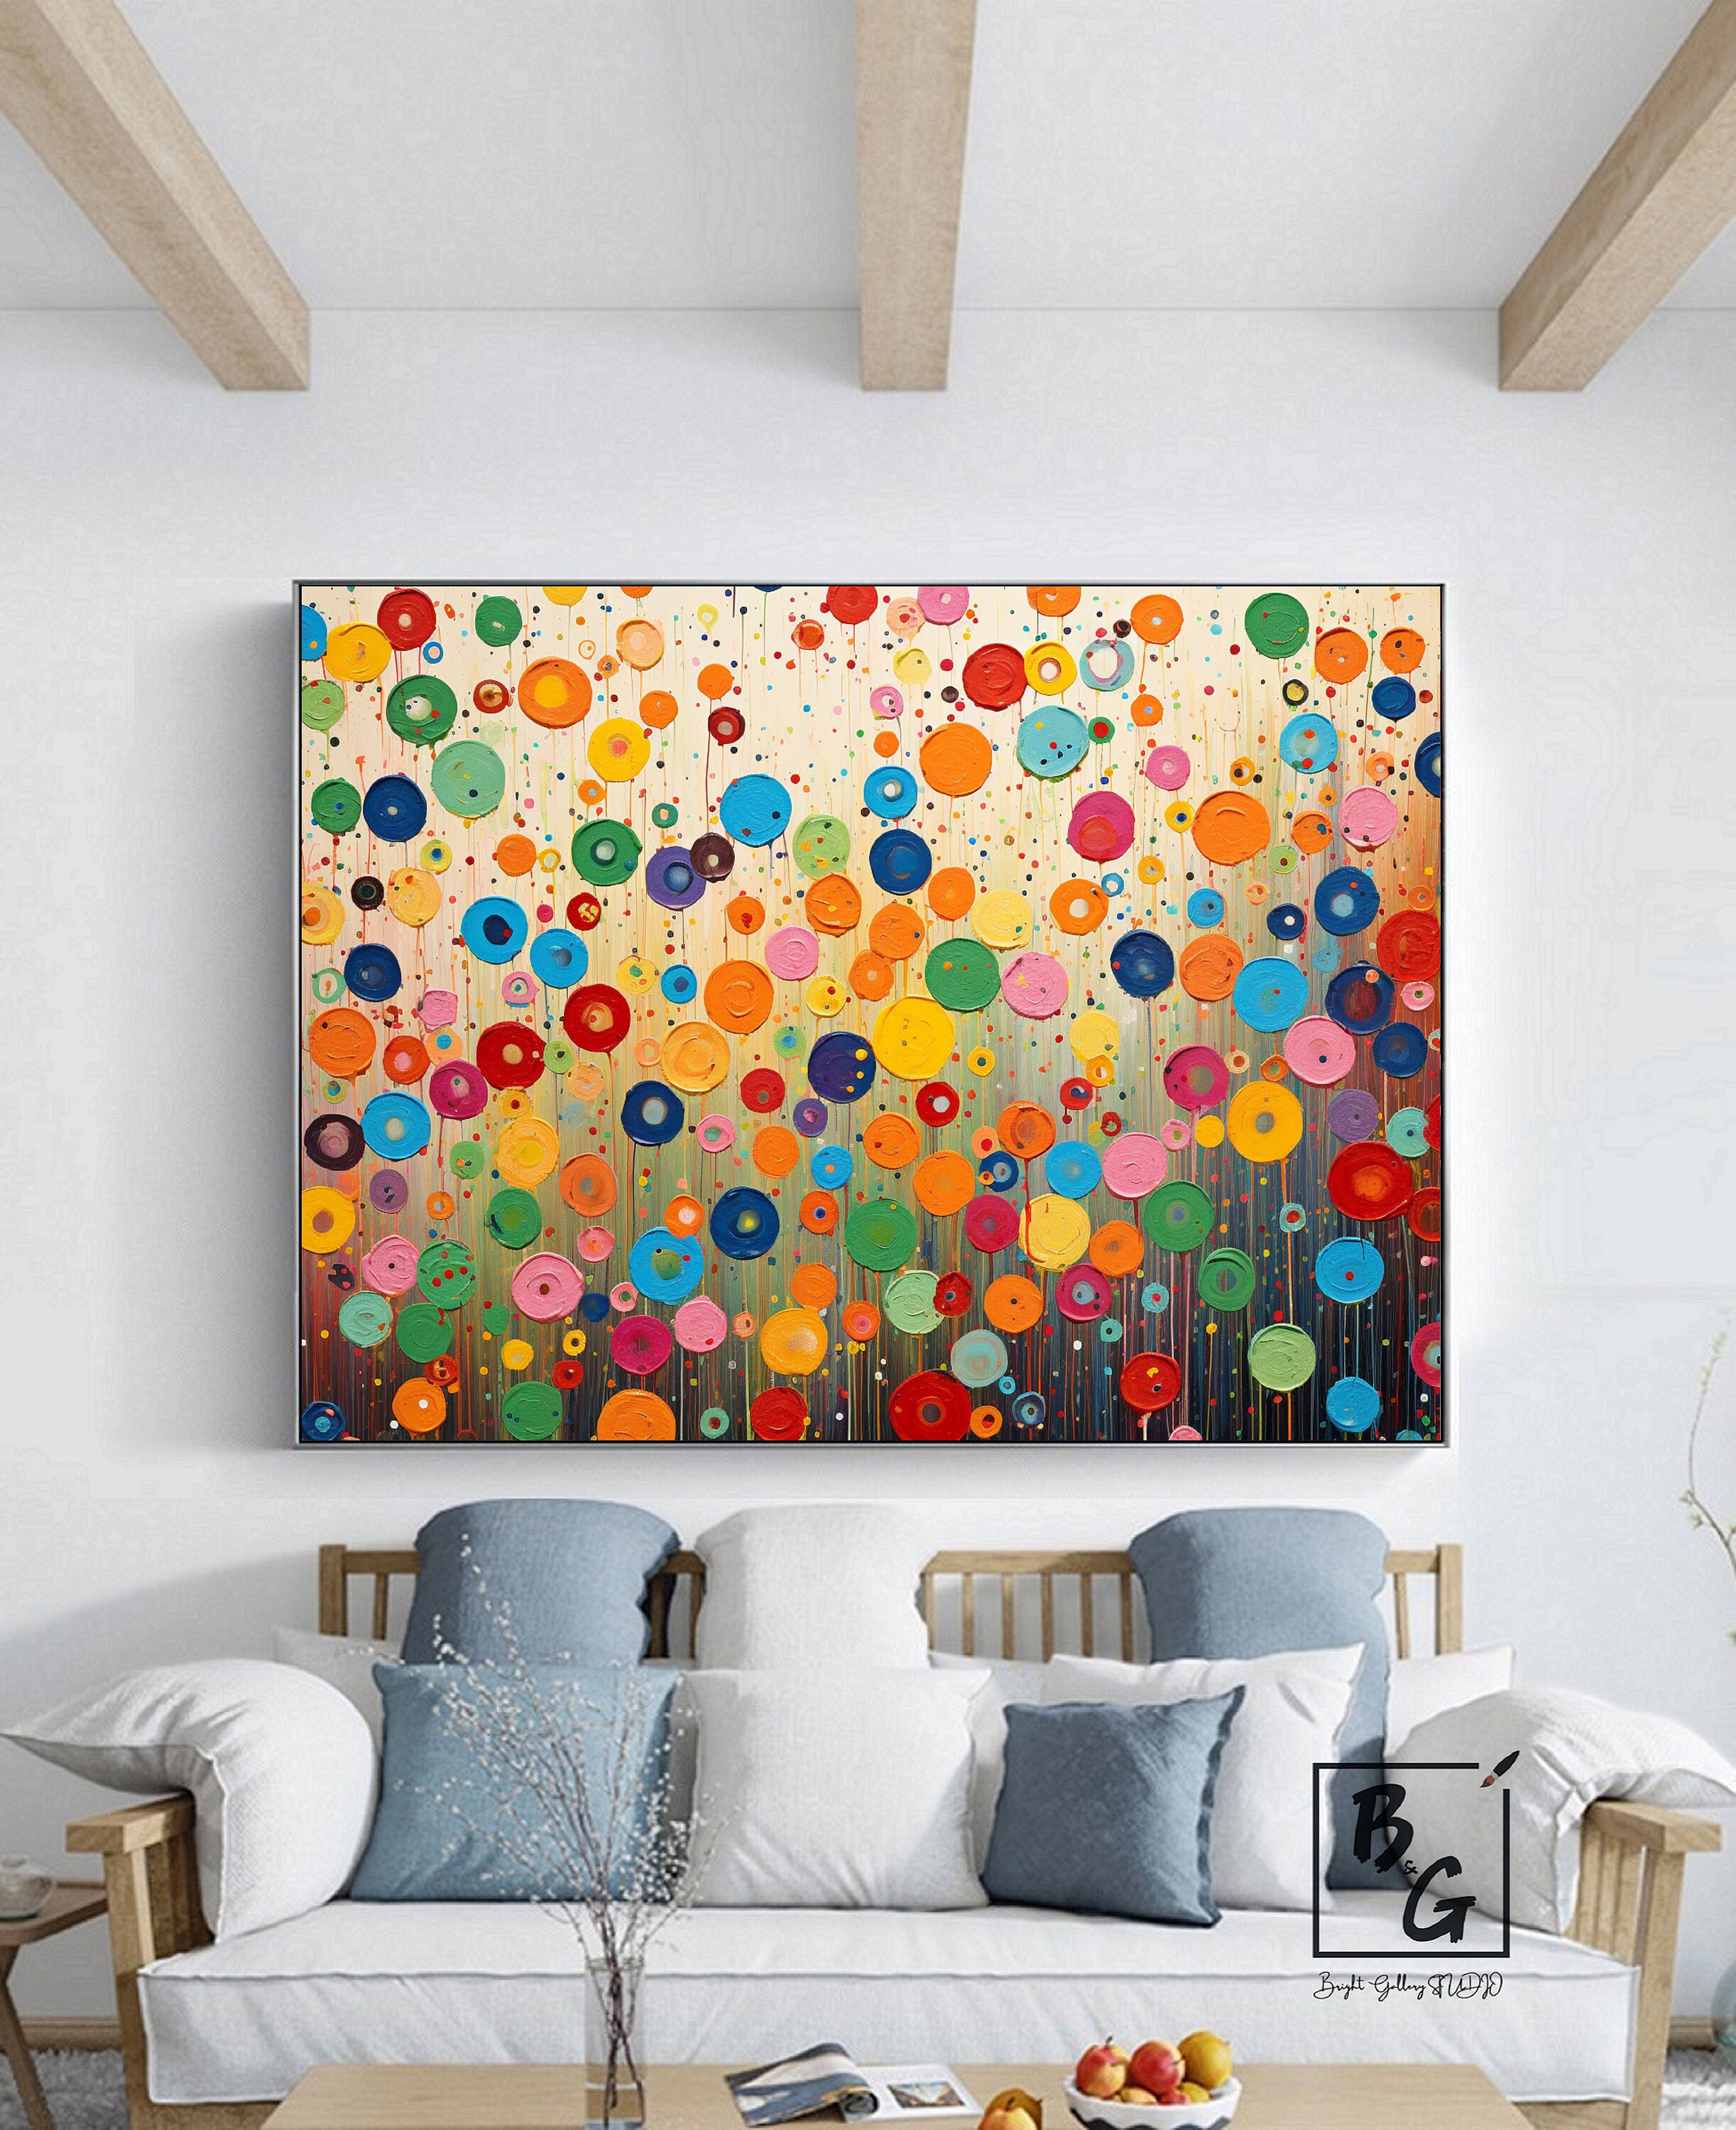 Large Original Acrylic Painting on Canvas,abstract Wall Painting,knife  Abstract Art,living Room Wall Canvas ,abstract Art Canvas Original 